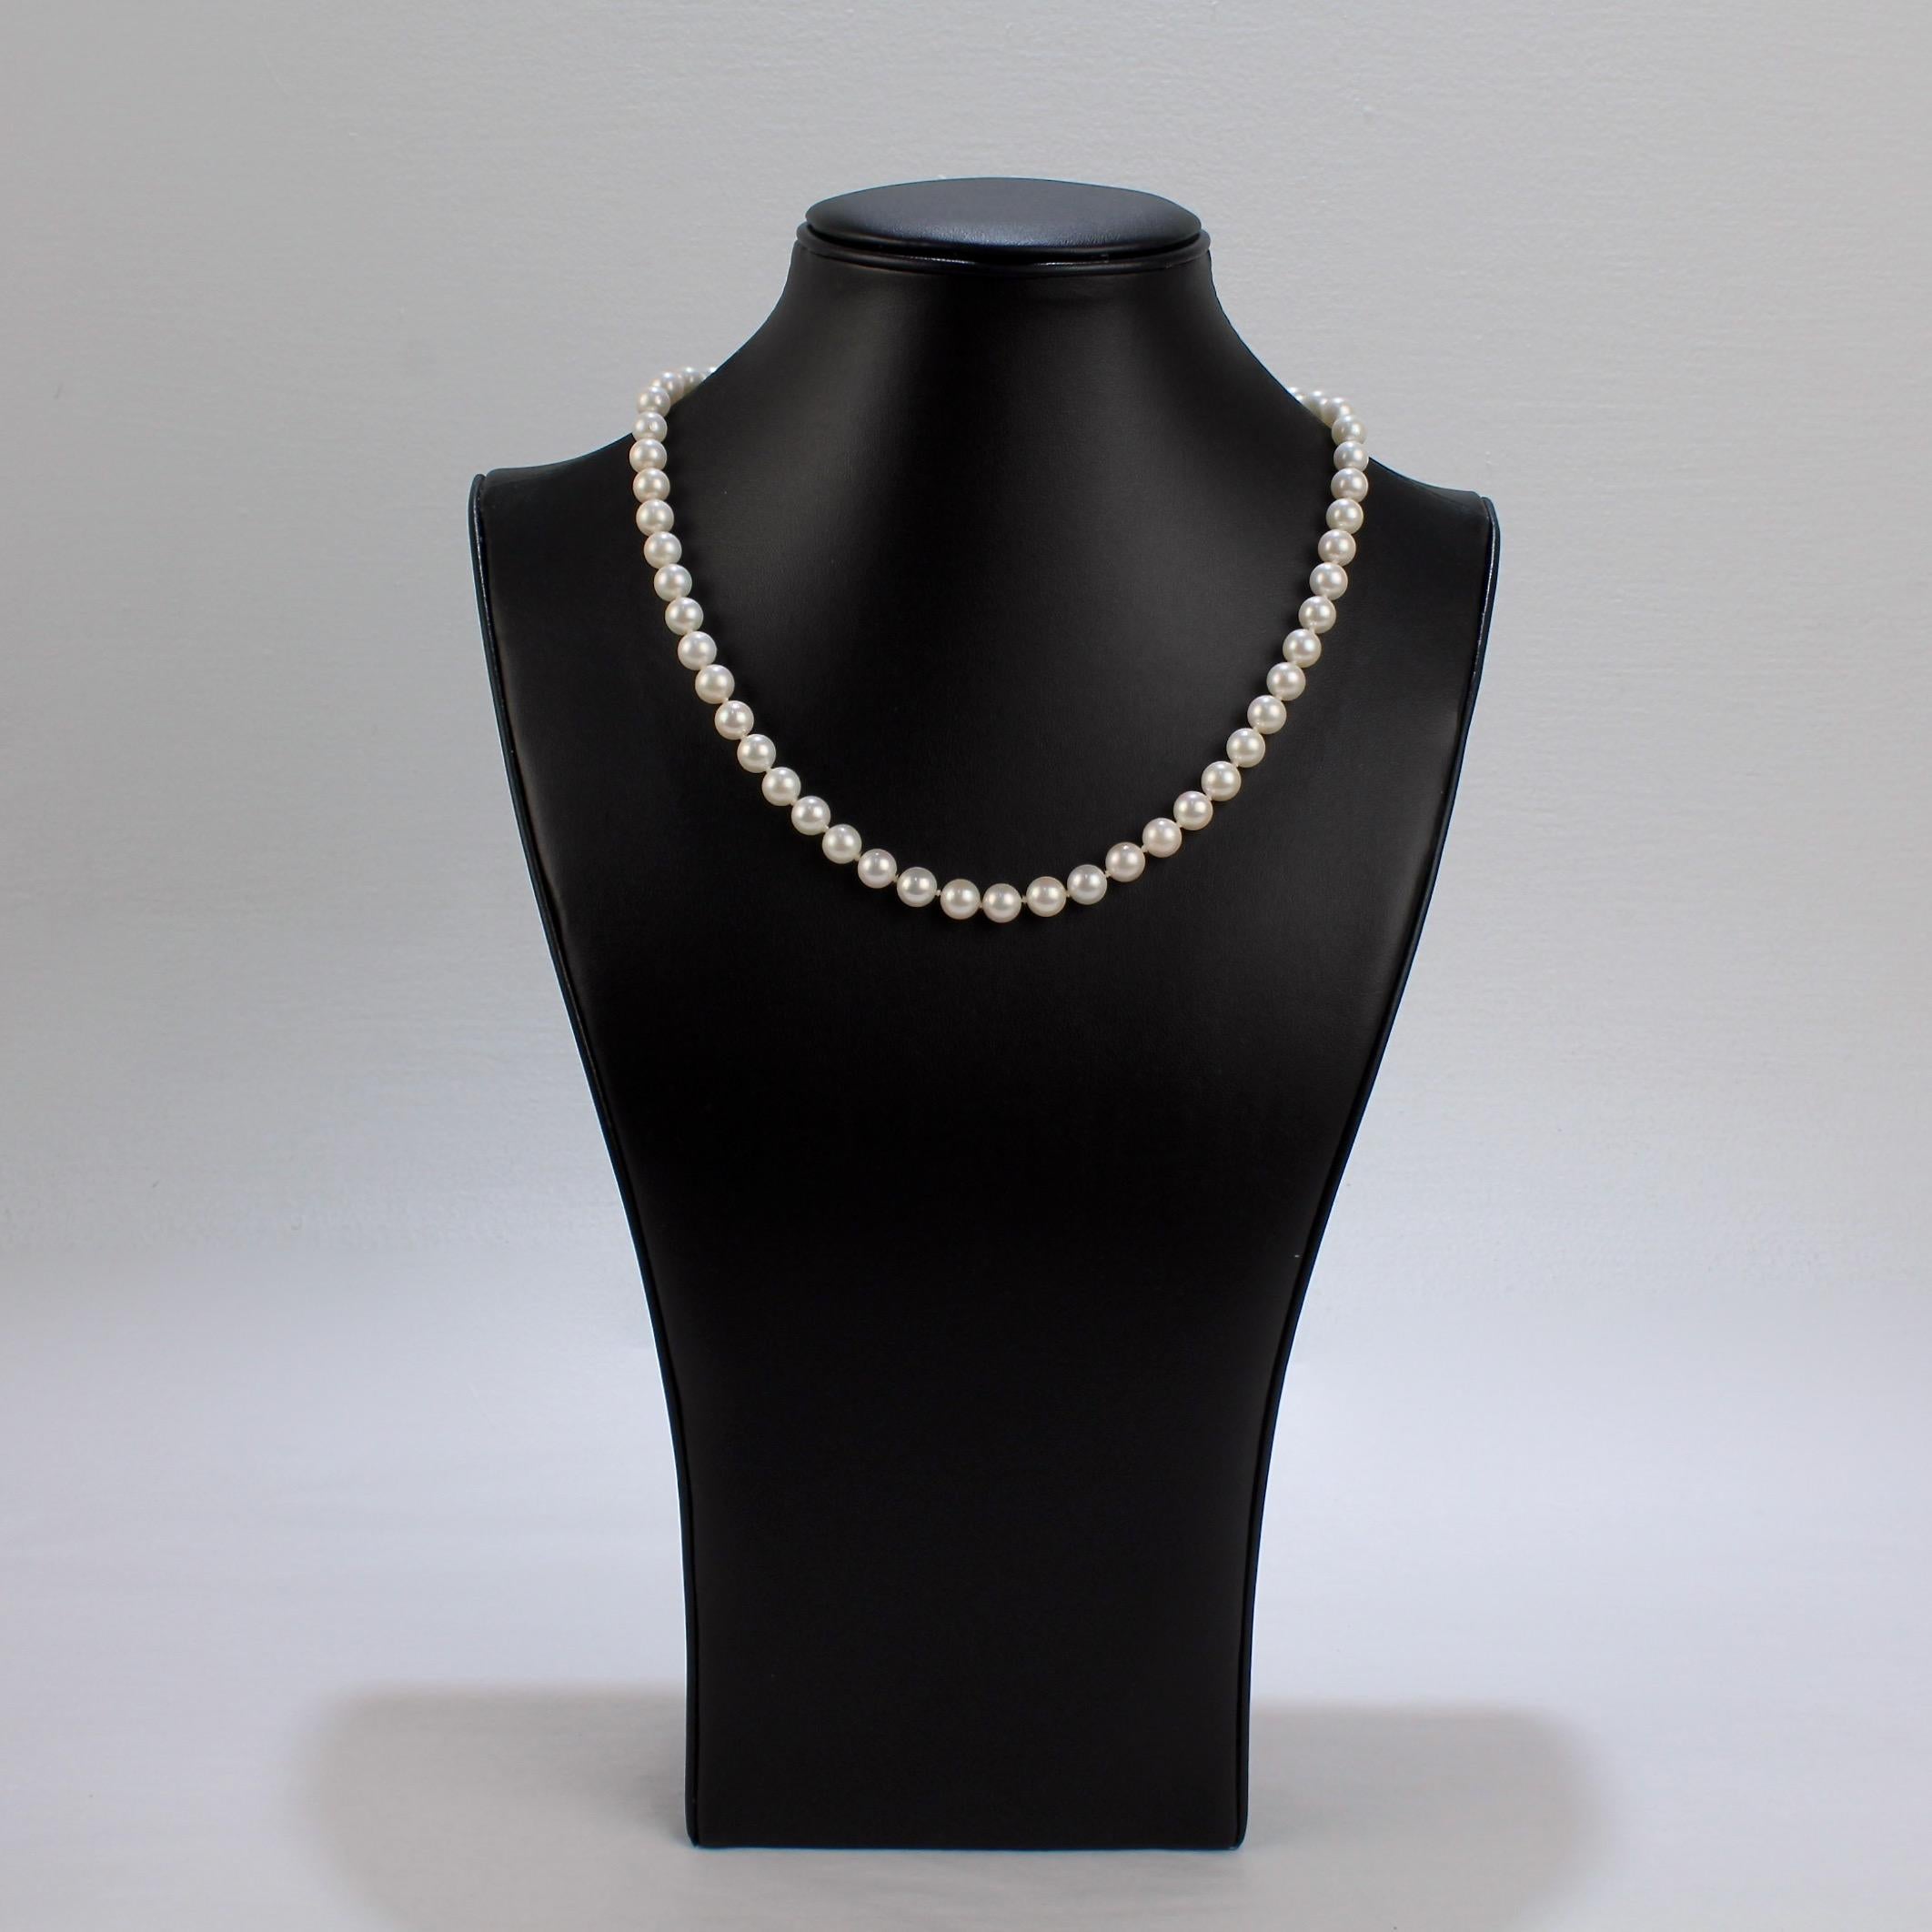 Round Cut Vintage Pearl Strand Necklace with Cultured Pearls and a 14 Karat Gold Clasp